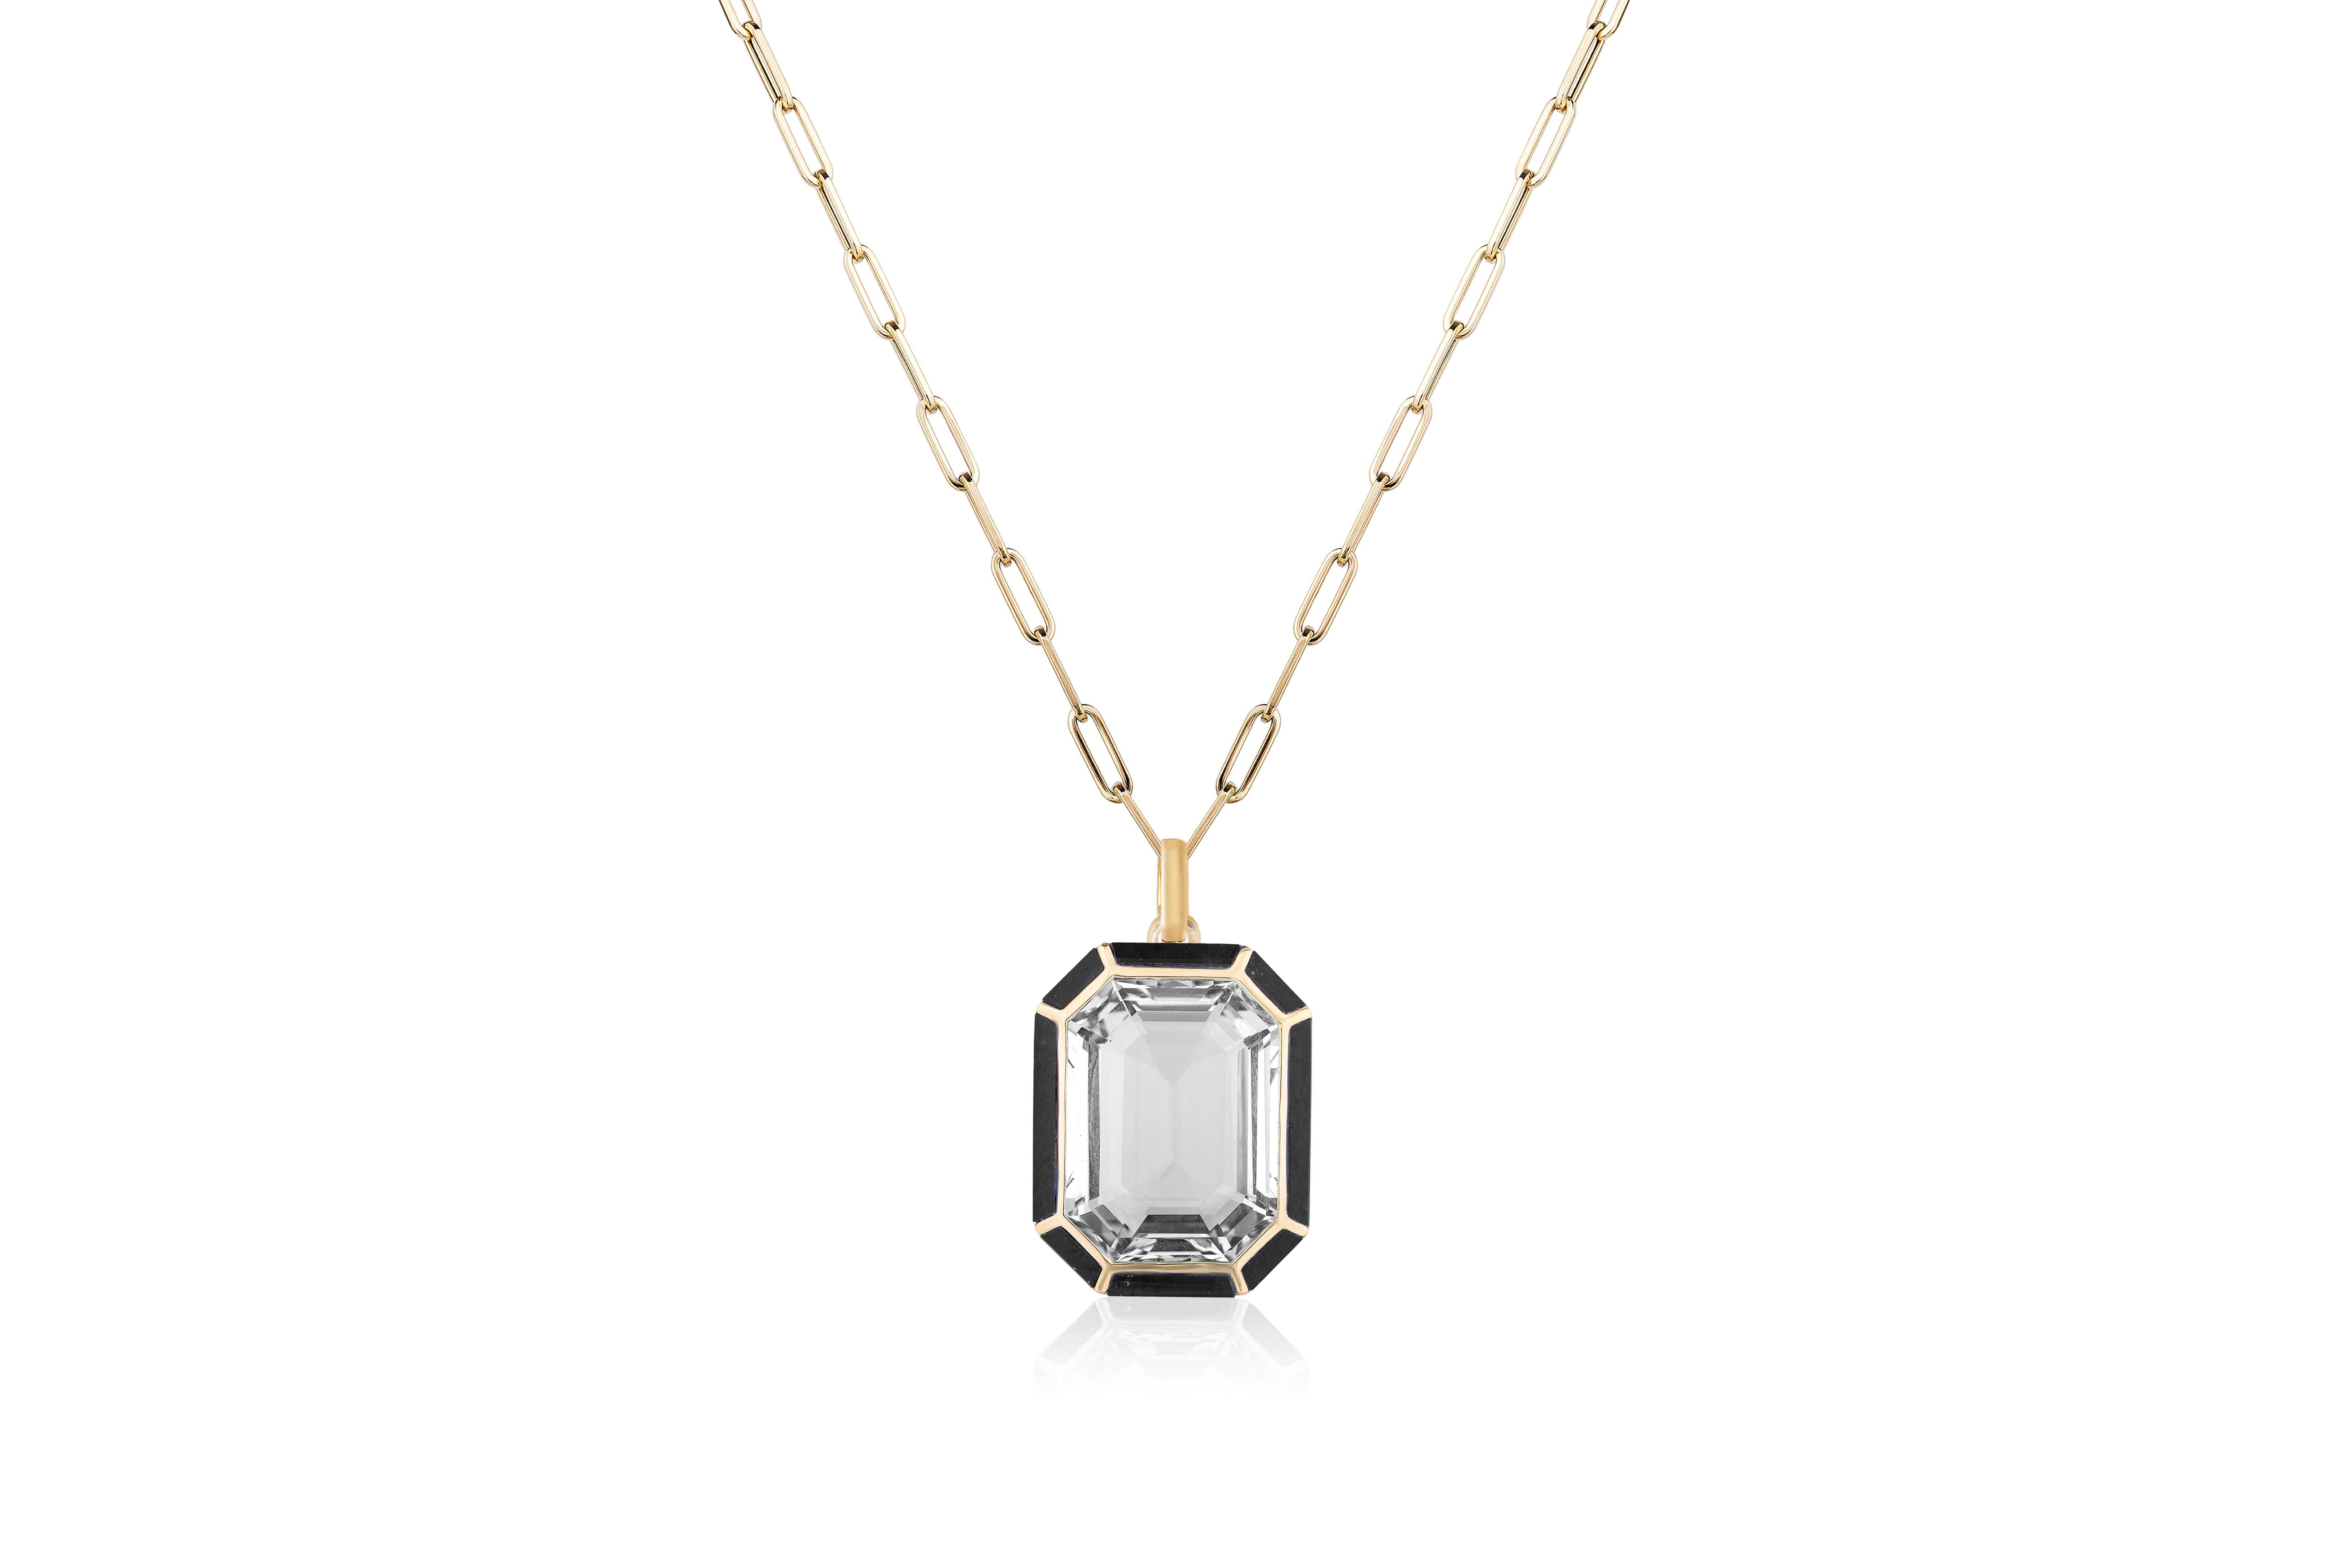 Rock Crystal and Onyx Emerald Cut Pendant in 18K Yellow Gold, from ''Mélange'' Collection.

Beautifully crafted, these special pieces from Goshwara are not to be missed!

* Chain Length: 18 in
* Gemstone: 100% Earth Mined 
* Approx. gemstone Weight: